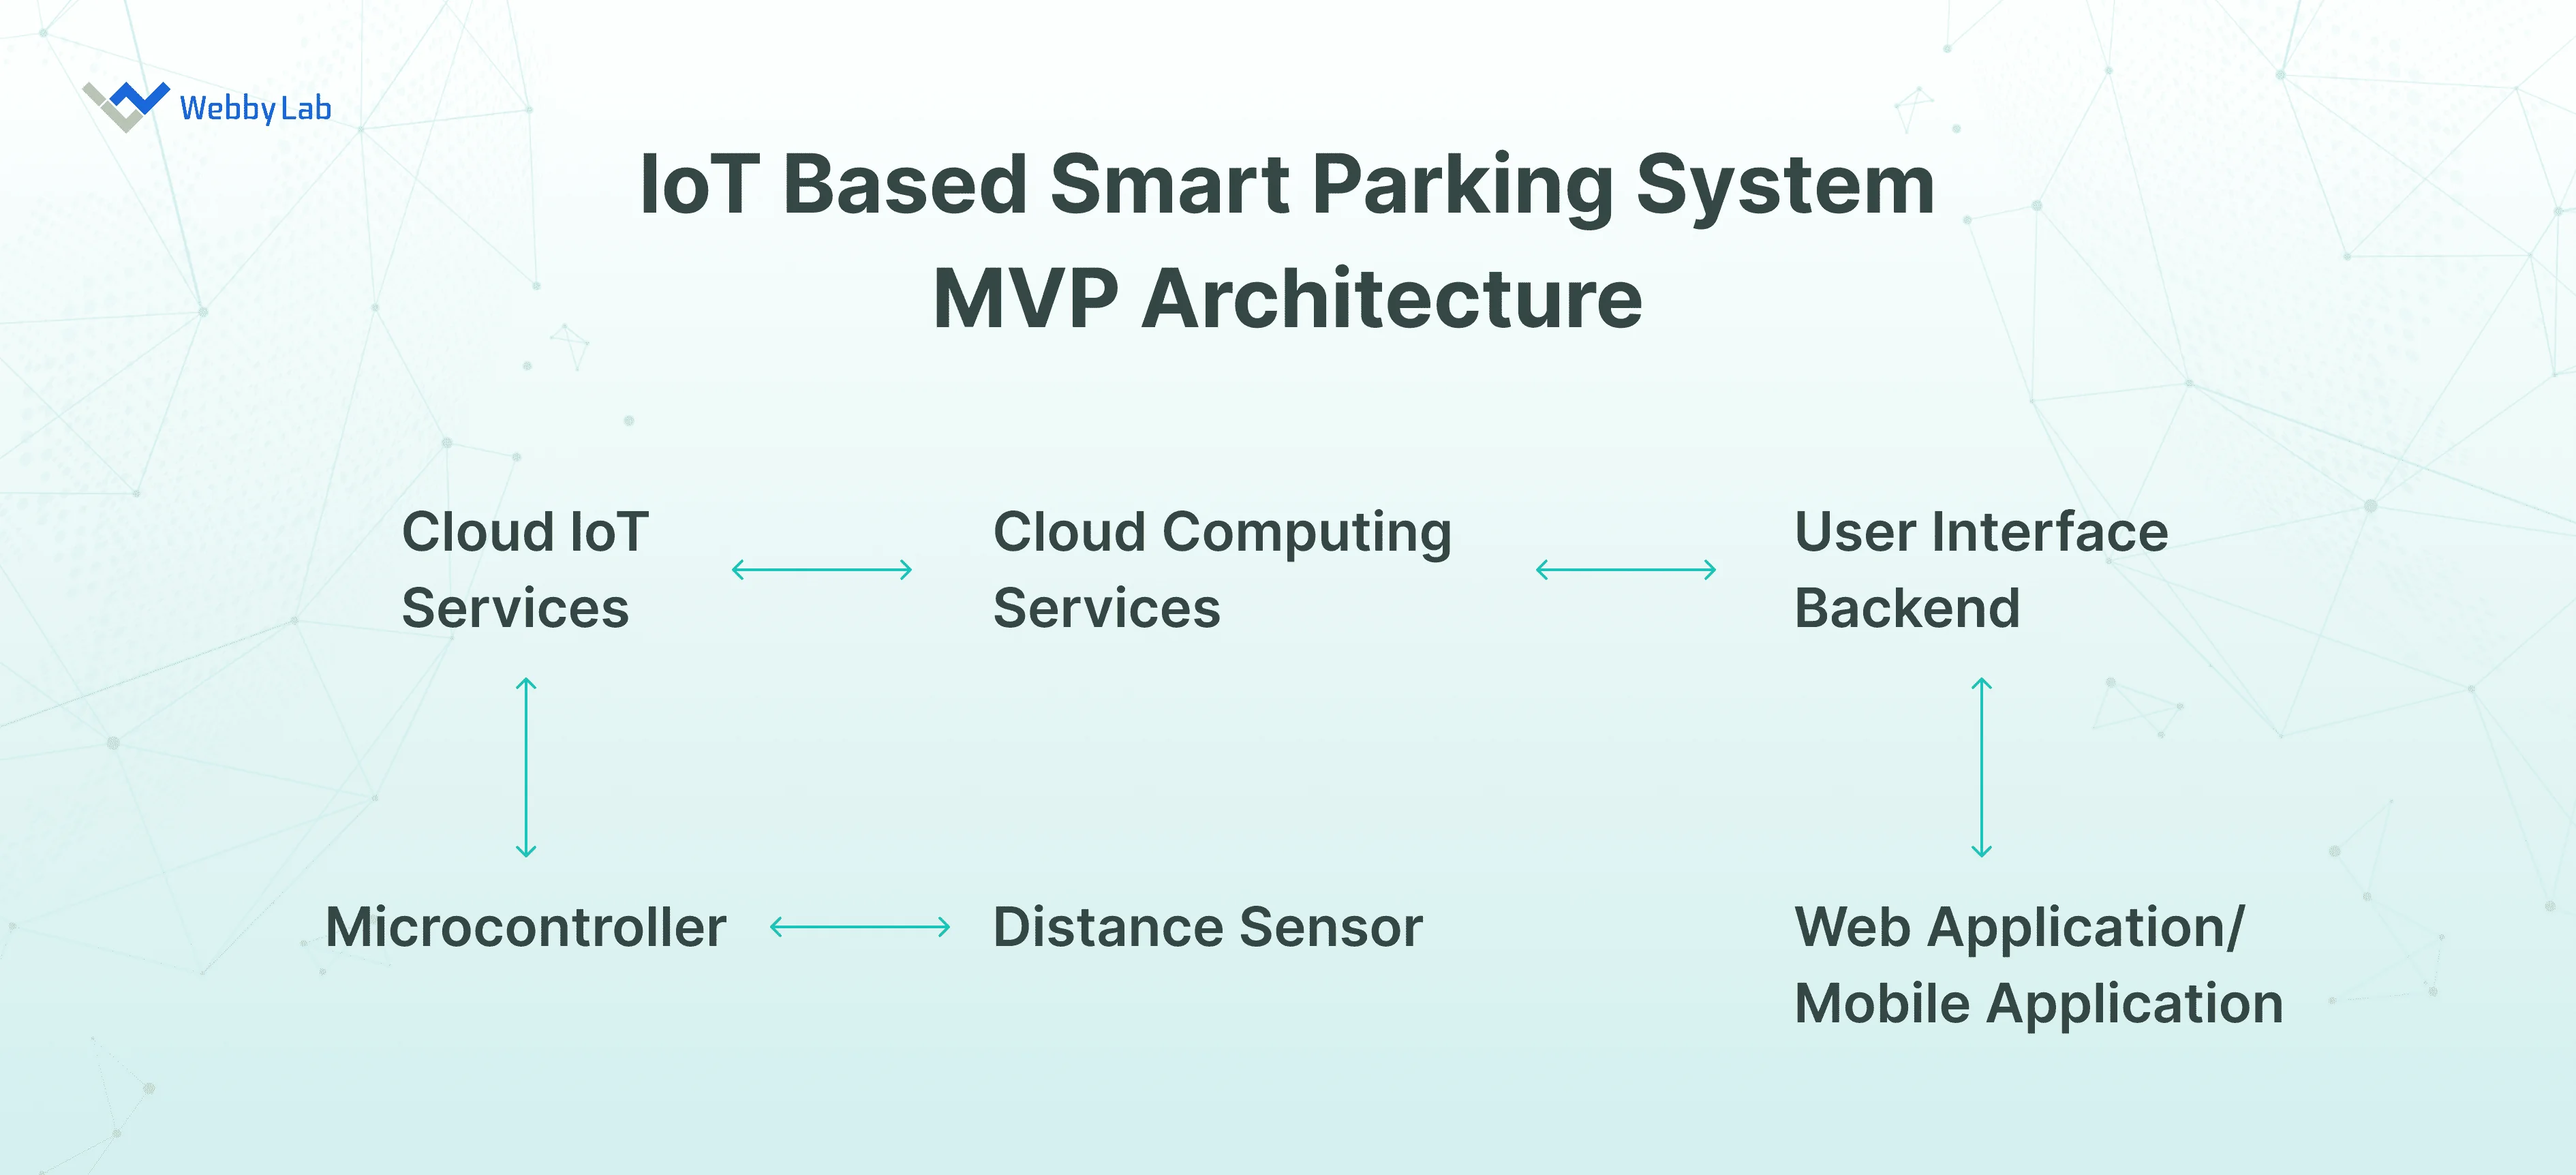 The architecture of an IoT-based smart parking system